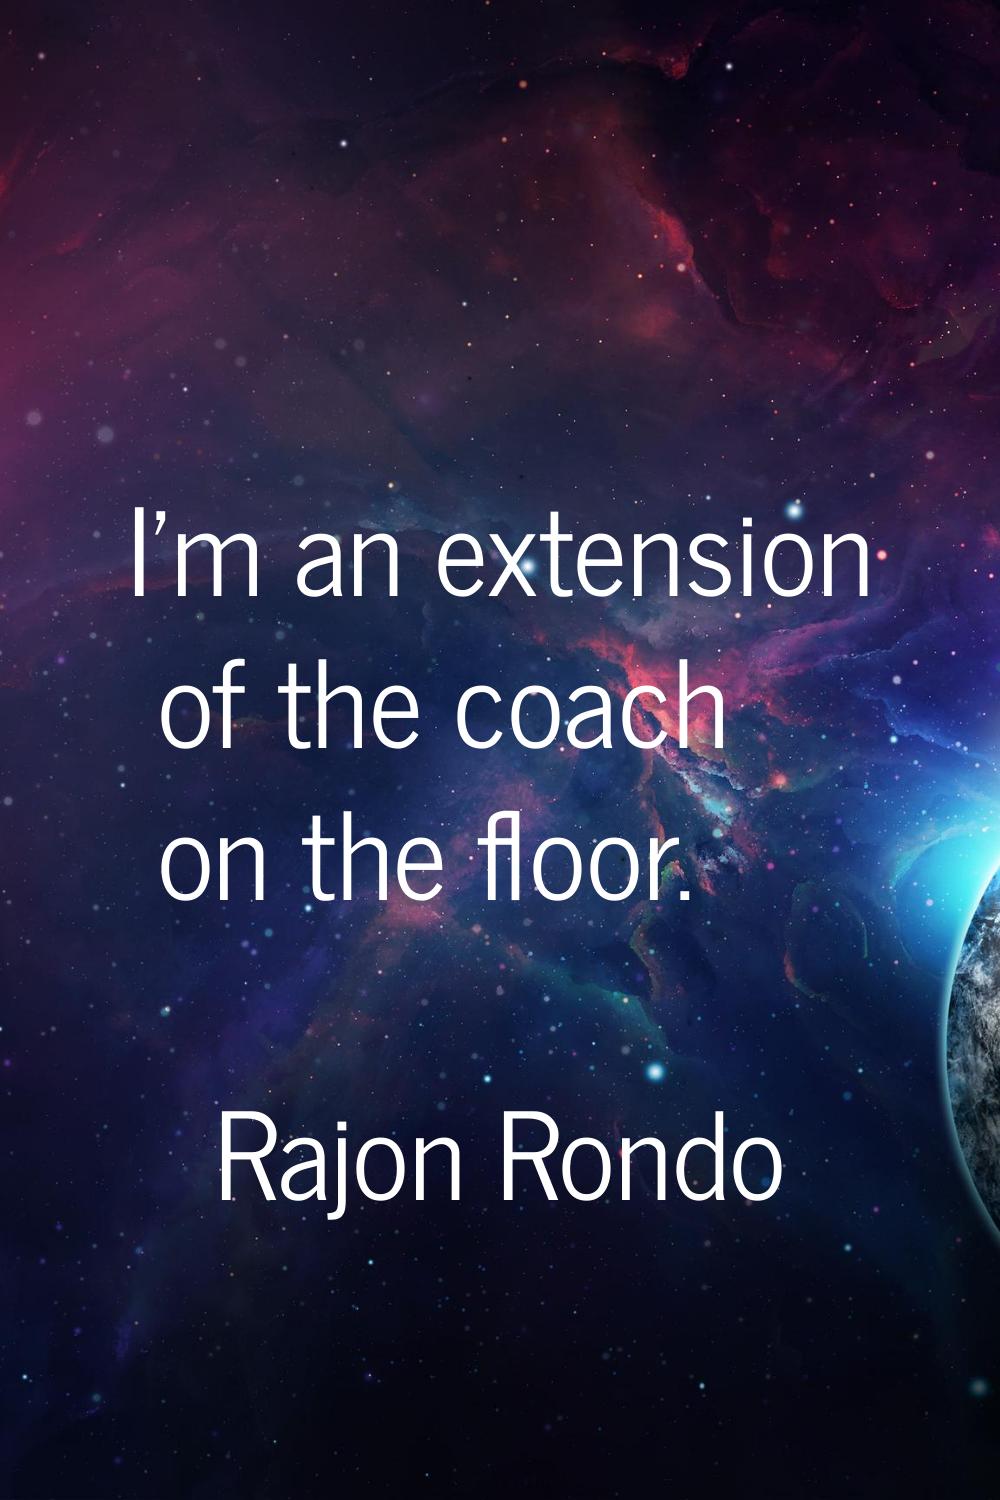 I'm an extension of the coach on the floor.